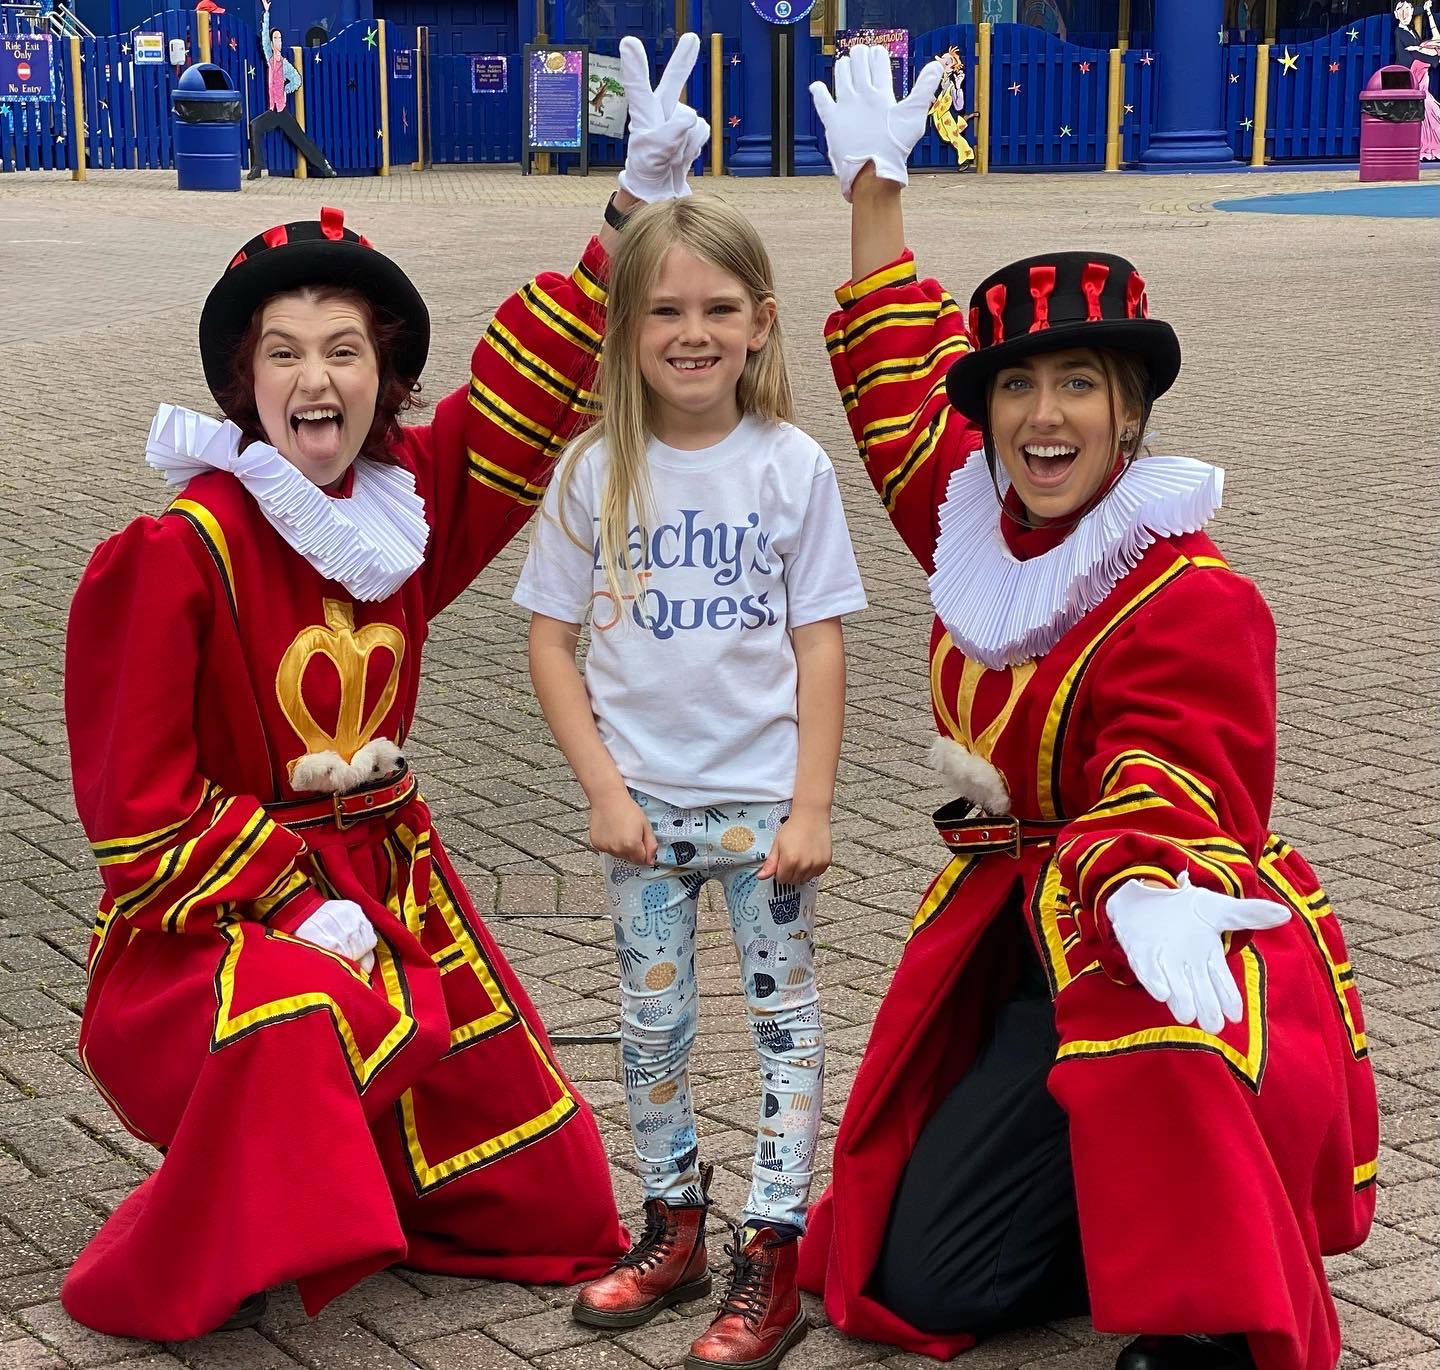 Child posing with two attraction actors